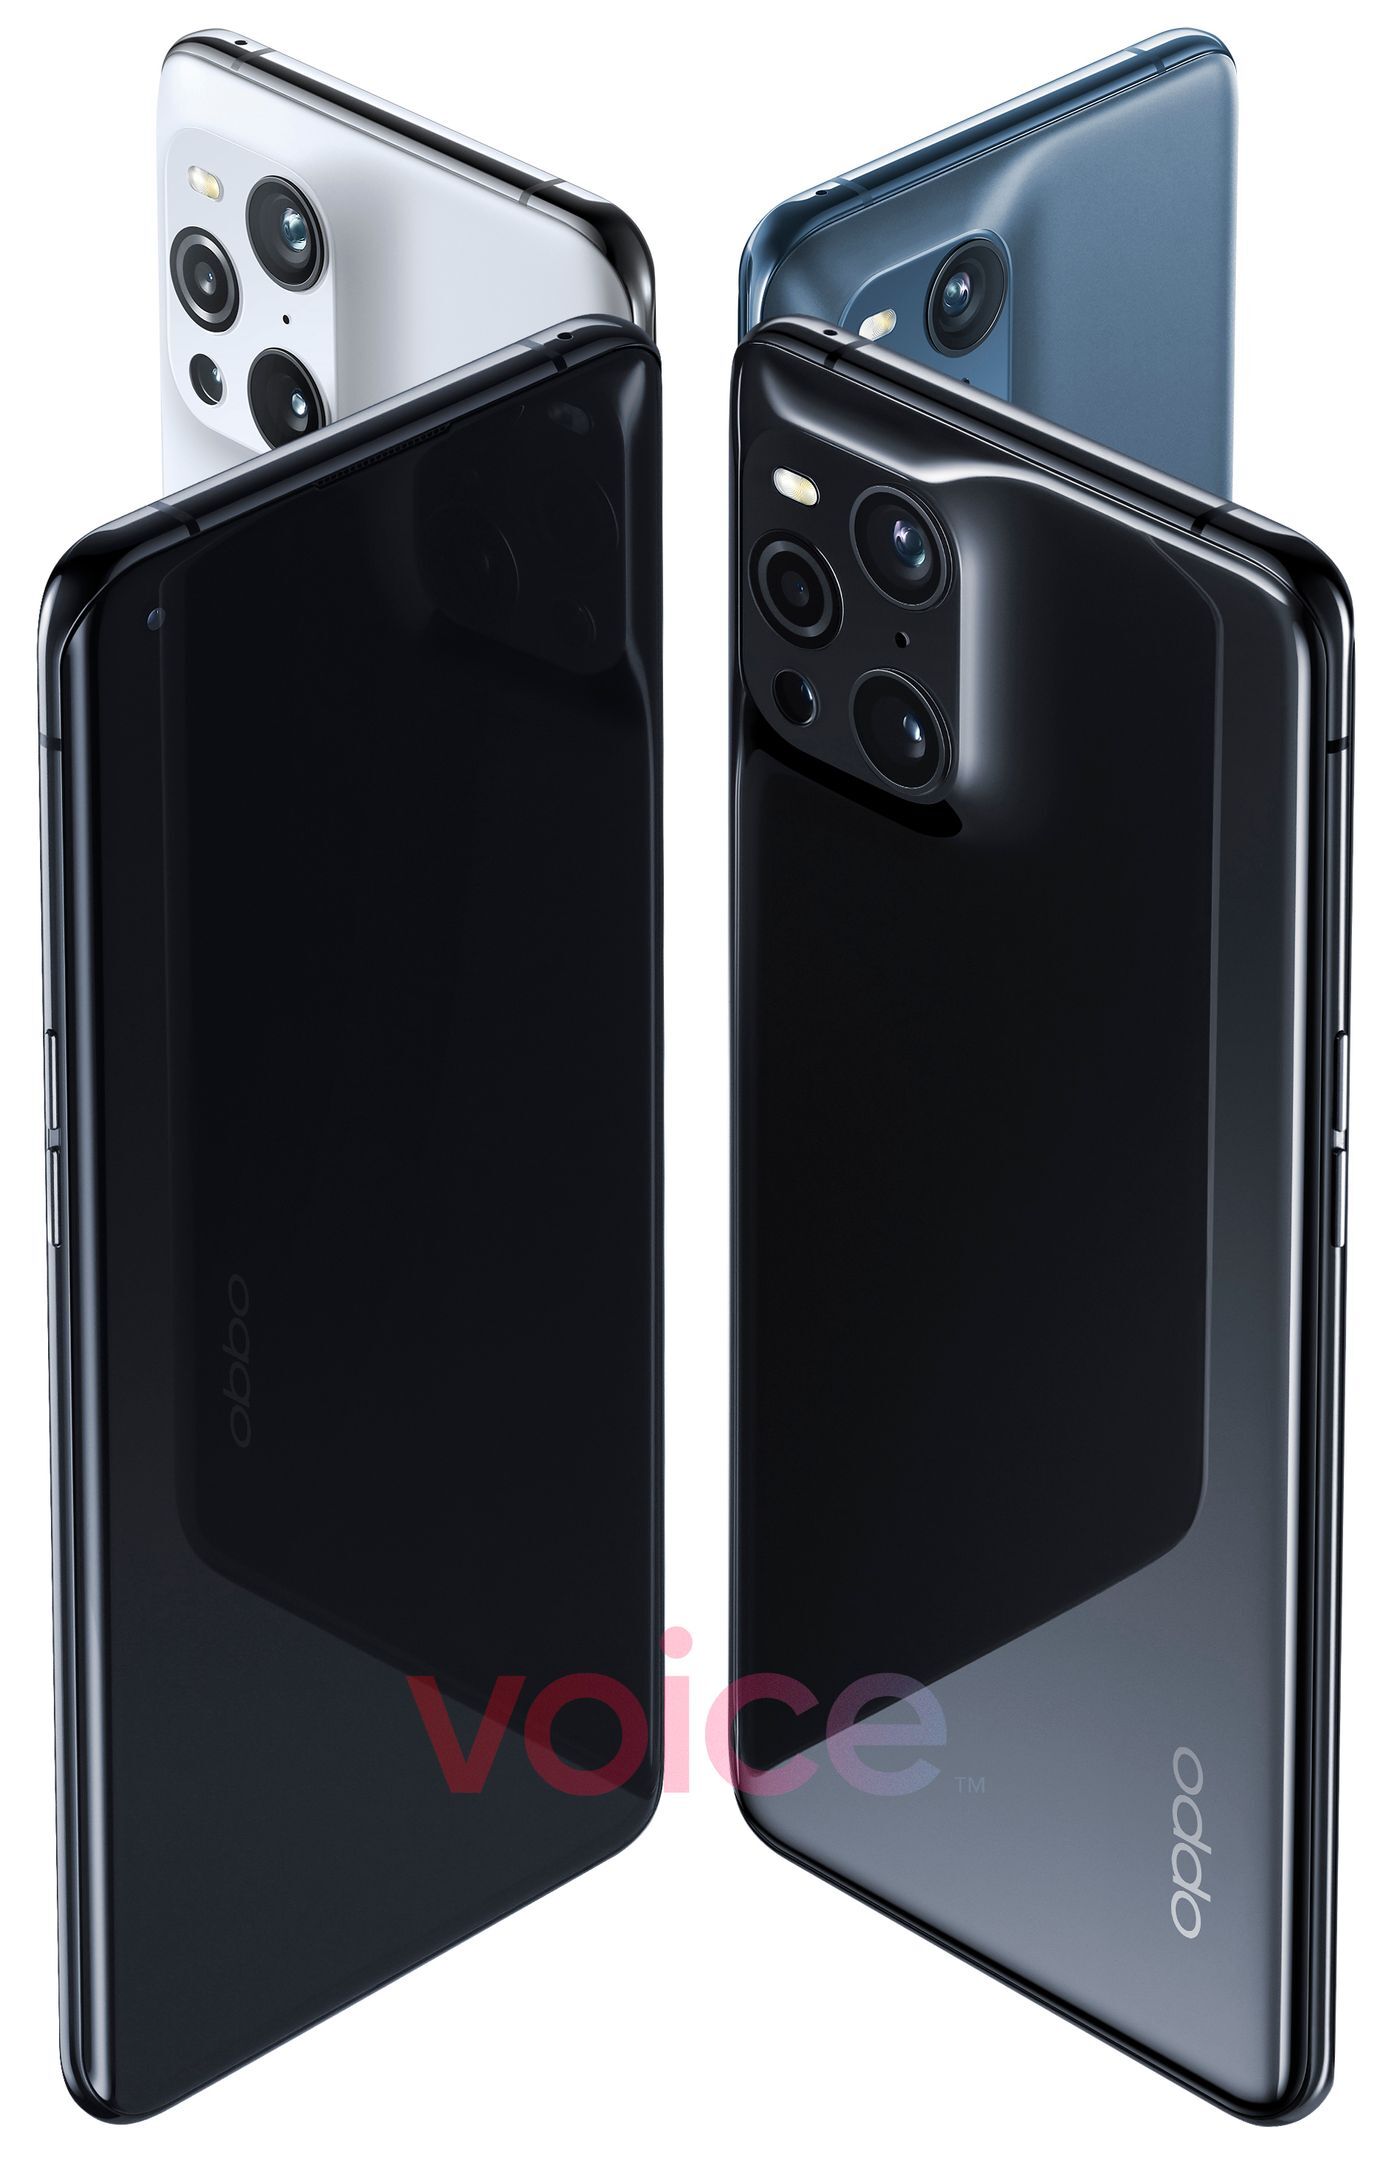 Oppo Find X3 Pro 5G leaks in full with iPhone-like camera, curved-edge display